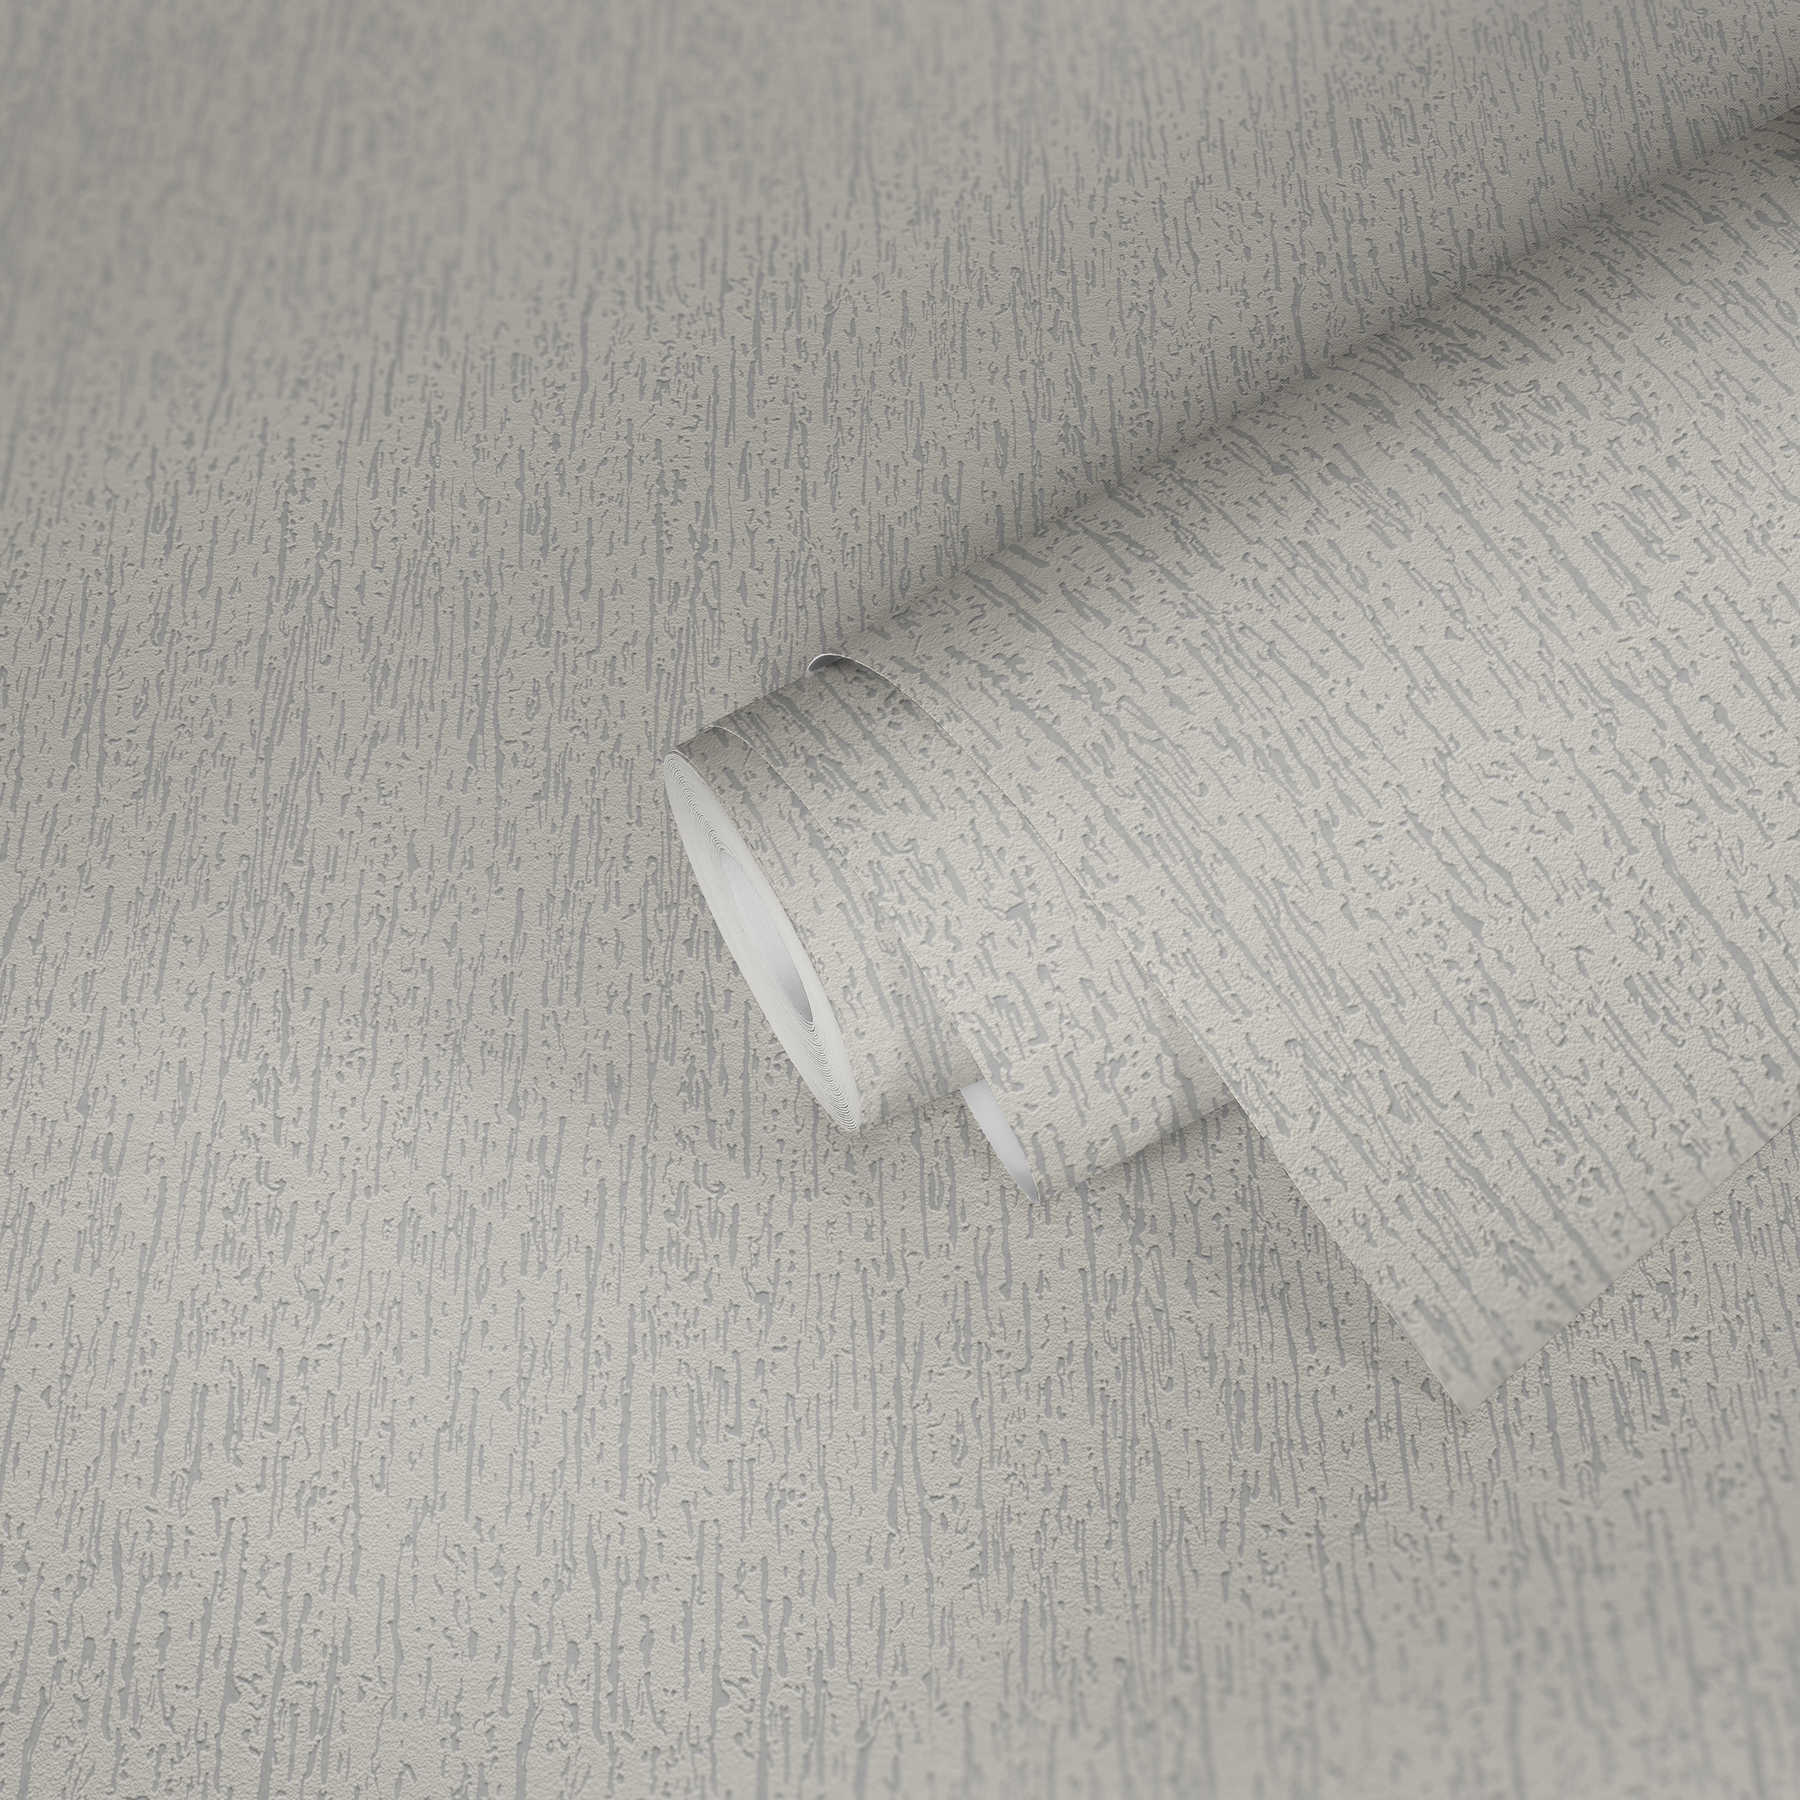             Paintable non-woven wallpaper in roughcast look - Paintable, White
        